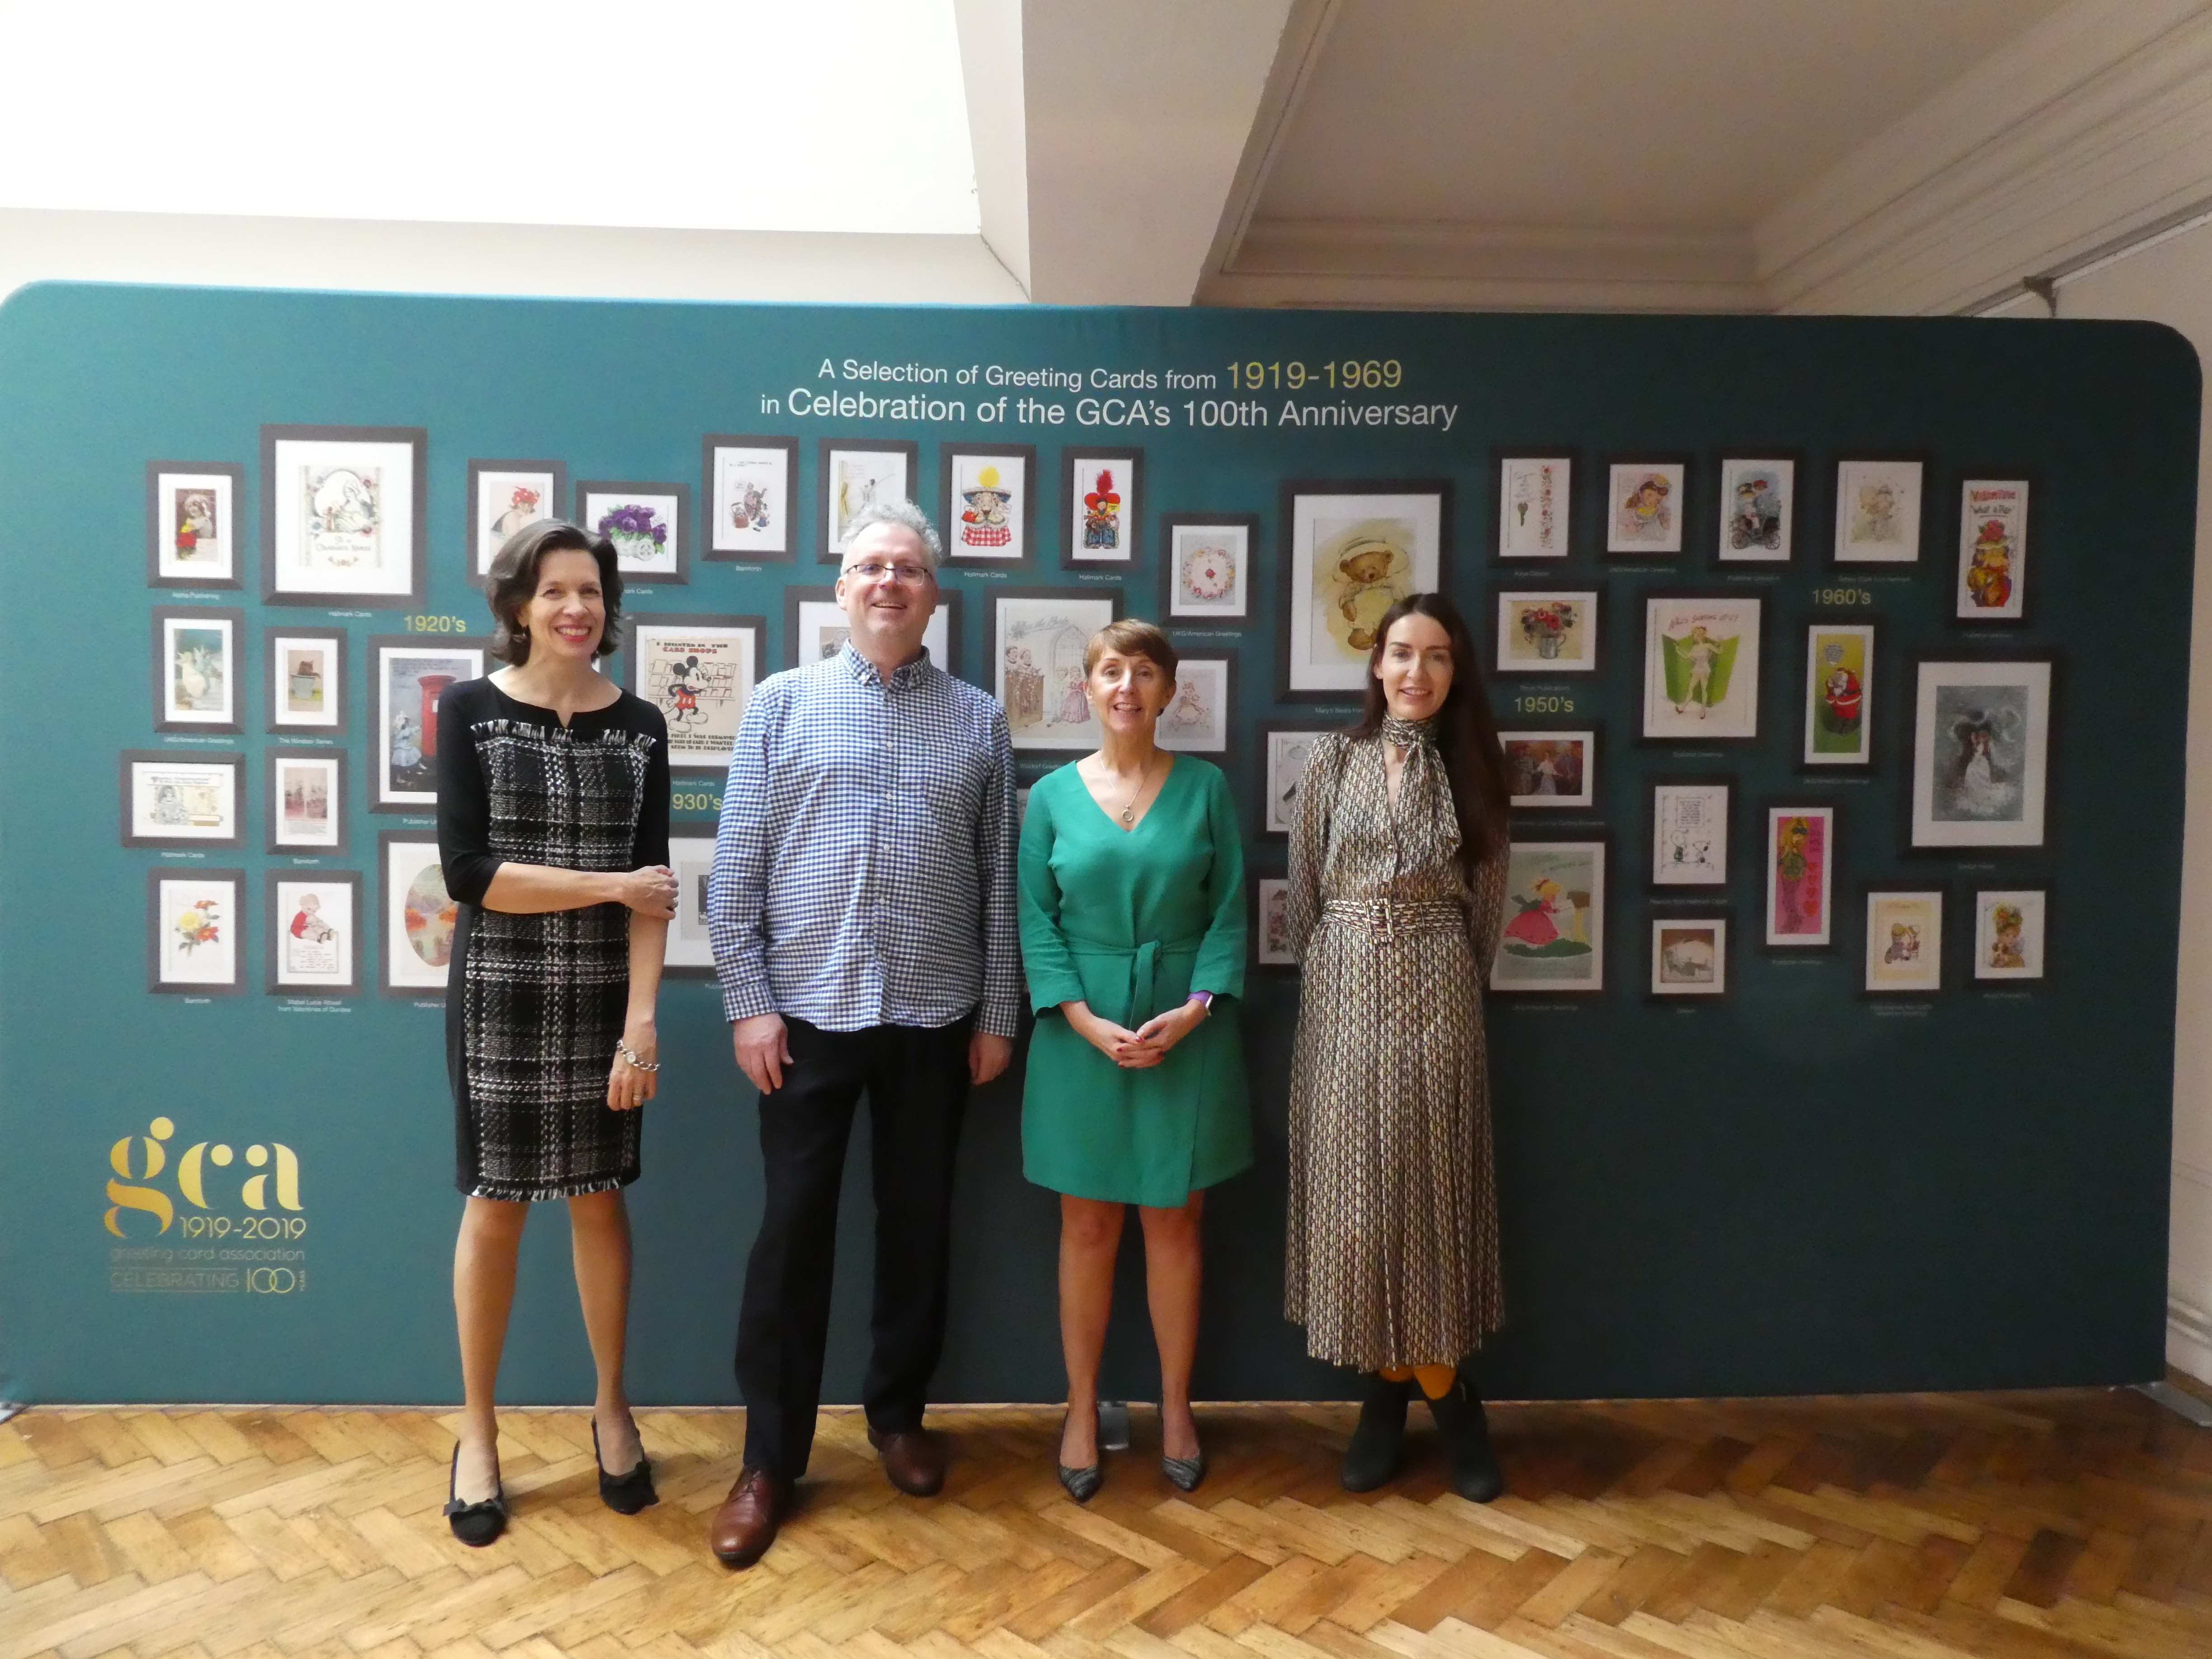 Above: The event saw the launch of a transportable exhibition to celebrate 100 years of the GCA through greeting cards of the last century. (Left-right) New GCA president Rachel Hare (Belly Button), outgoing president Ceri Stirland (UKG), Geoff Sanderson (Celebration Nation, who curated the exhibition) and Amanda Fergusson (GCA) in front of one of four sides of the exhibition panels. 